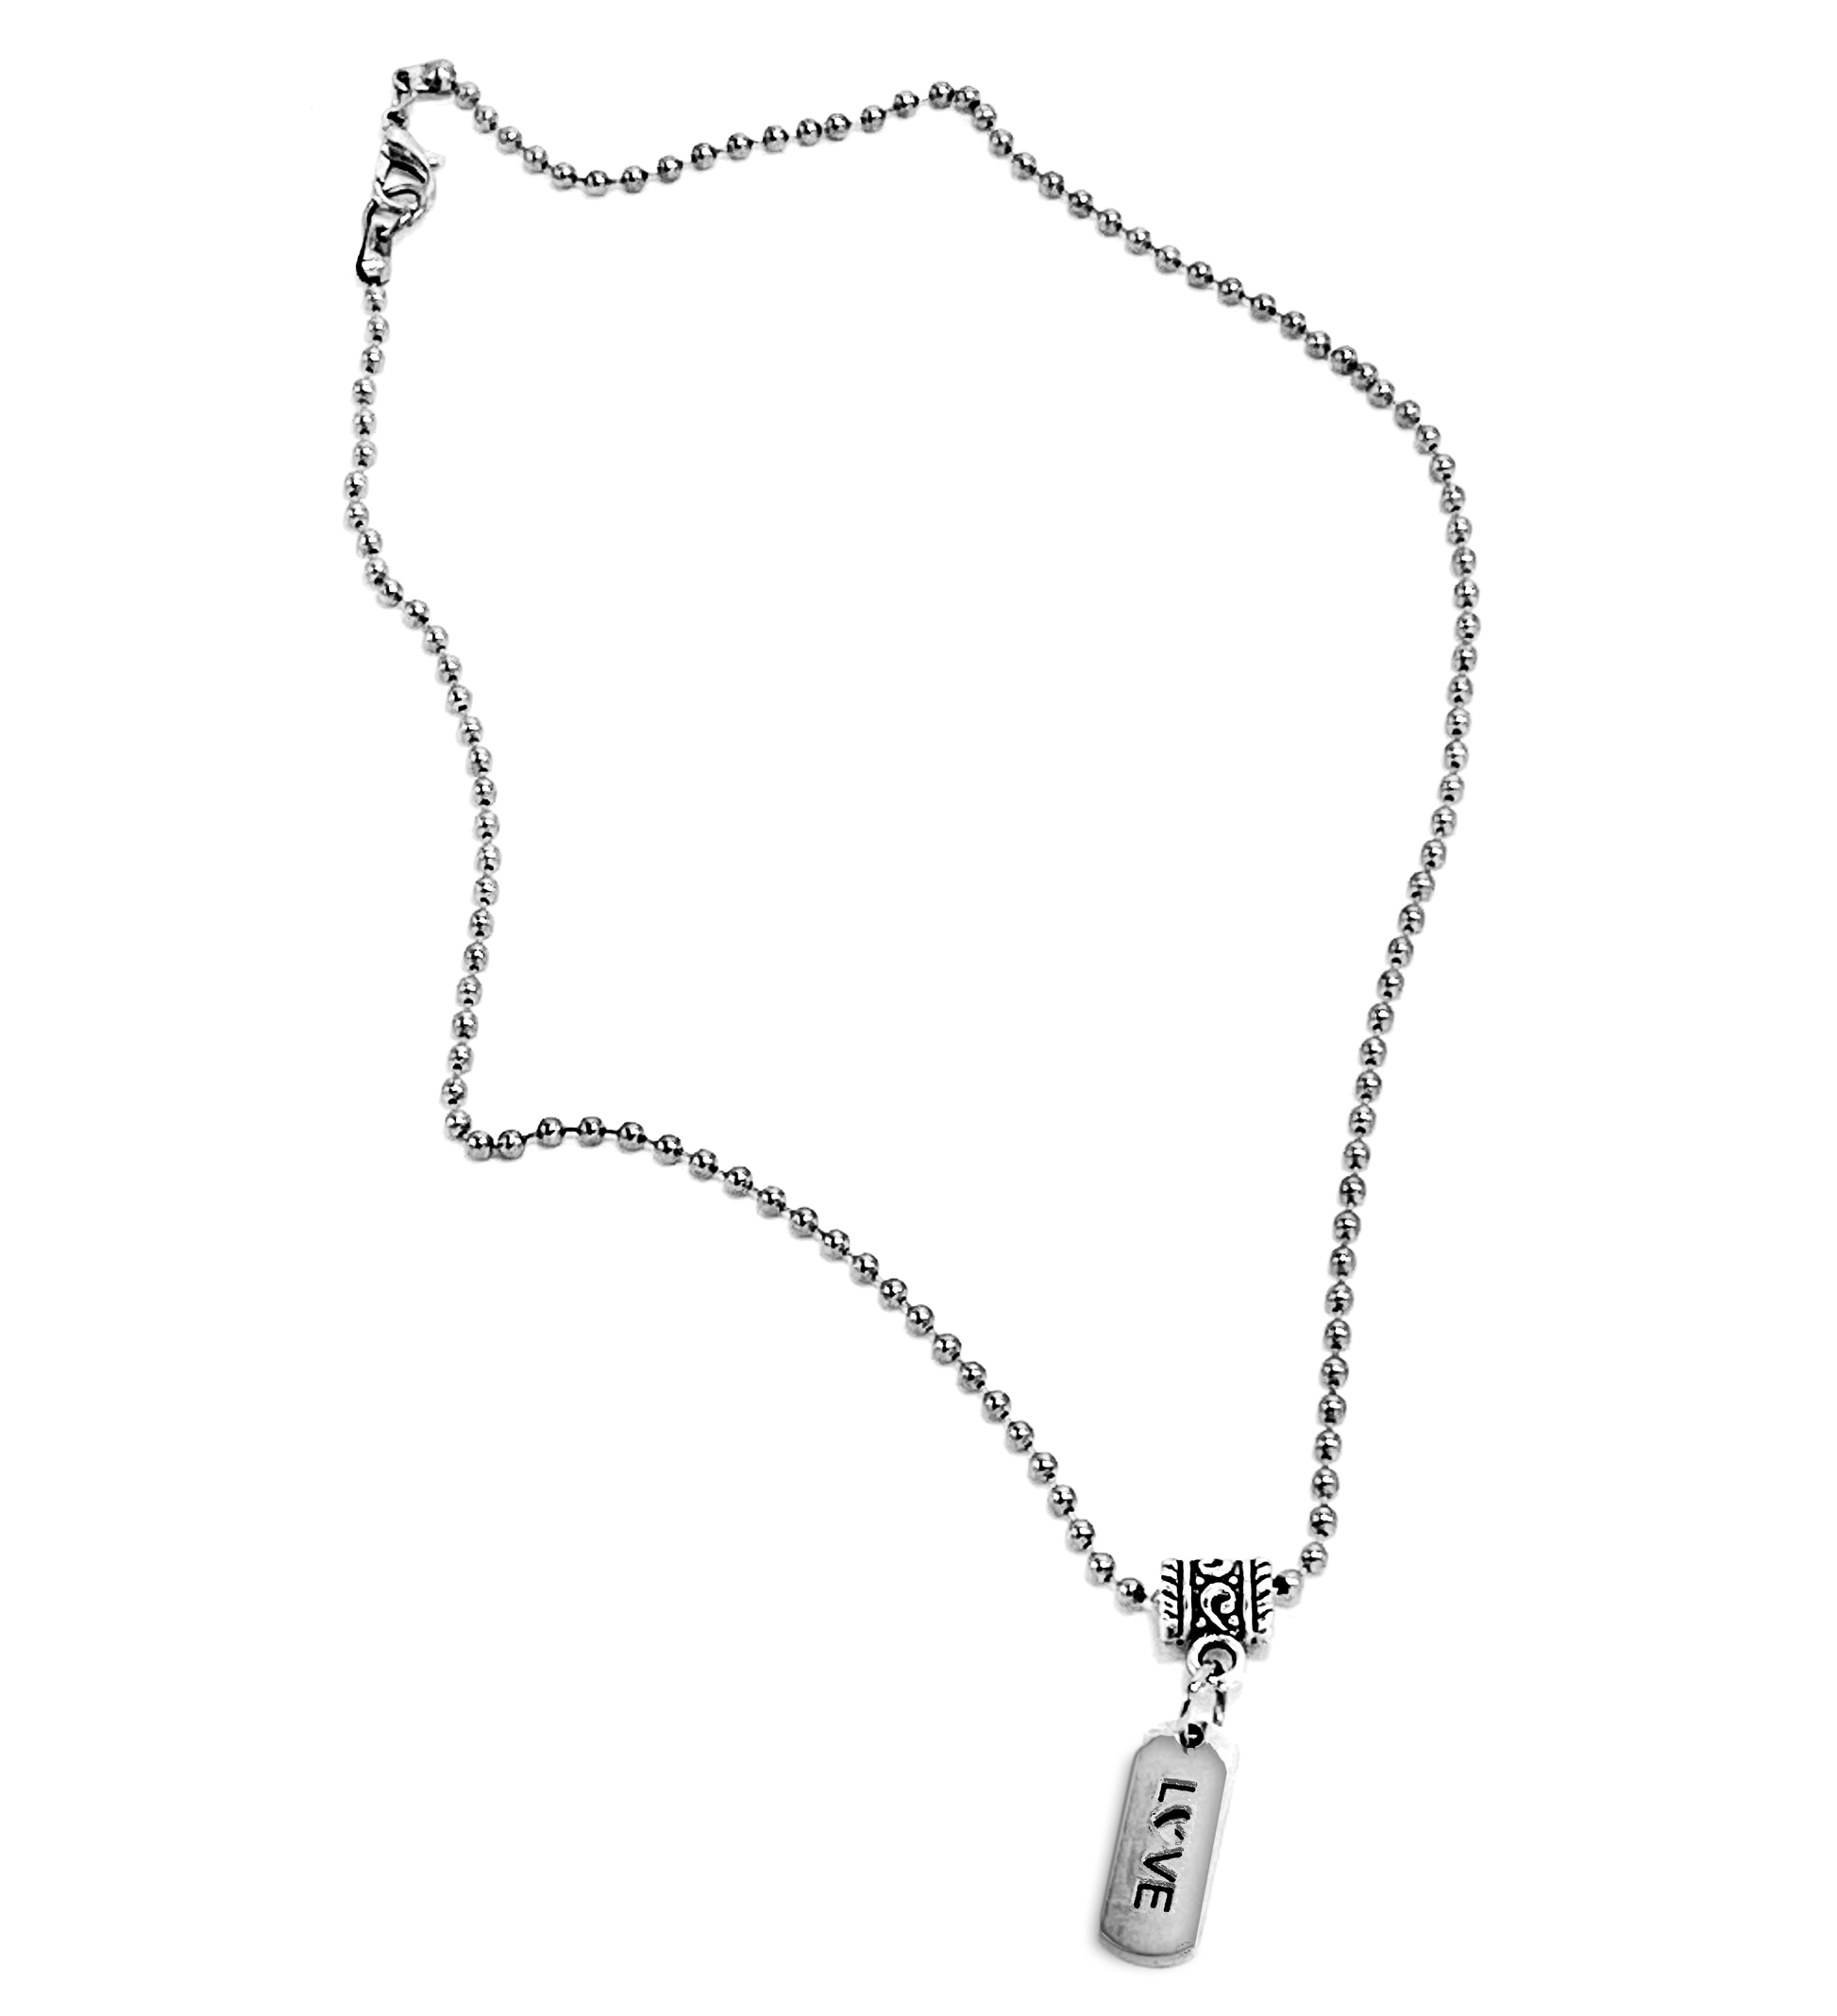 Silver Ball Chain Love Tag Necklace - Mercy Plus Grace